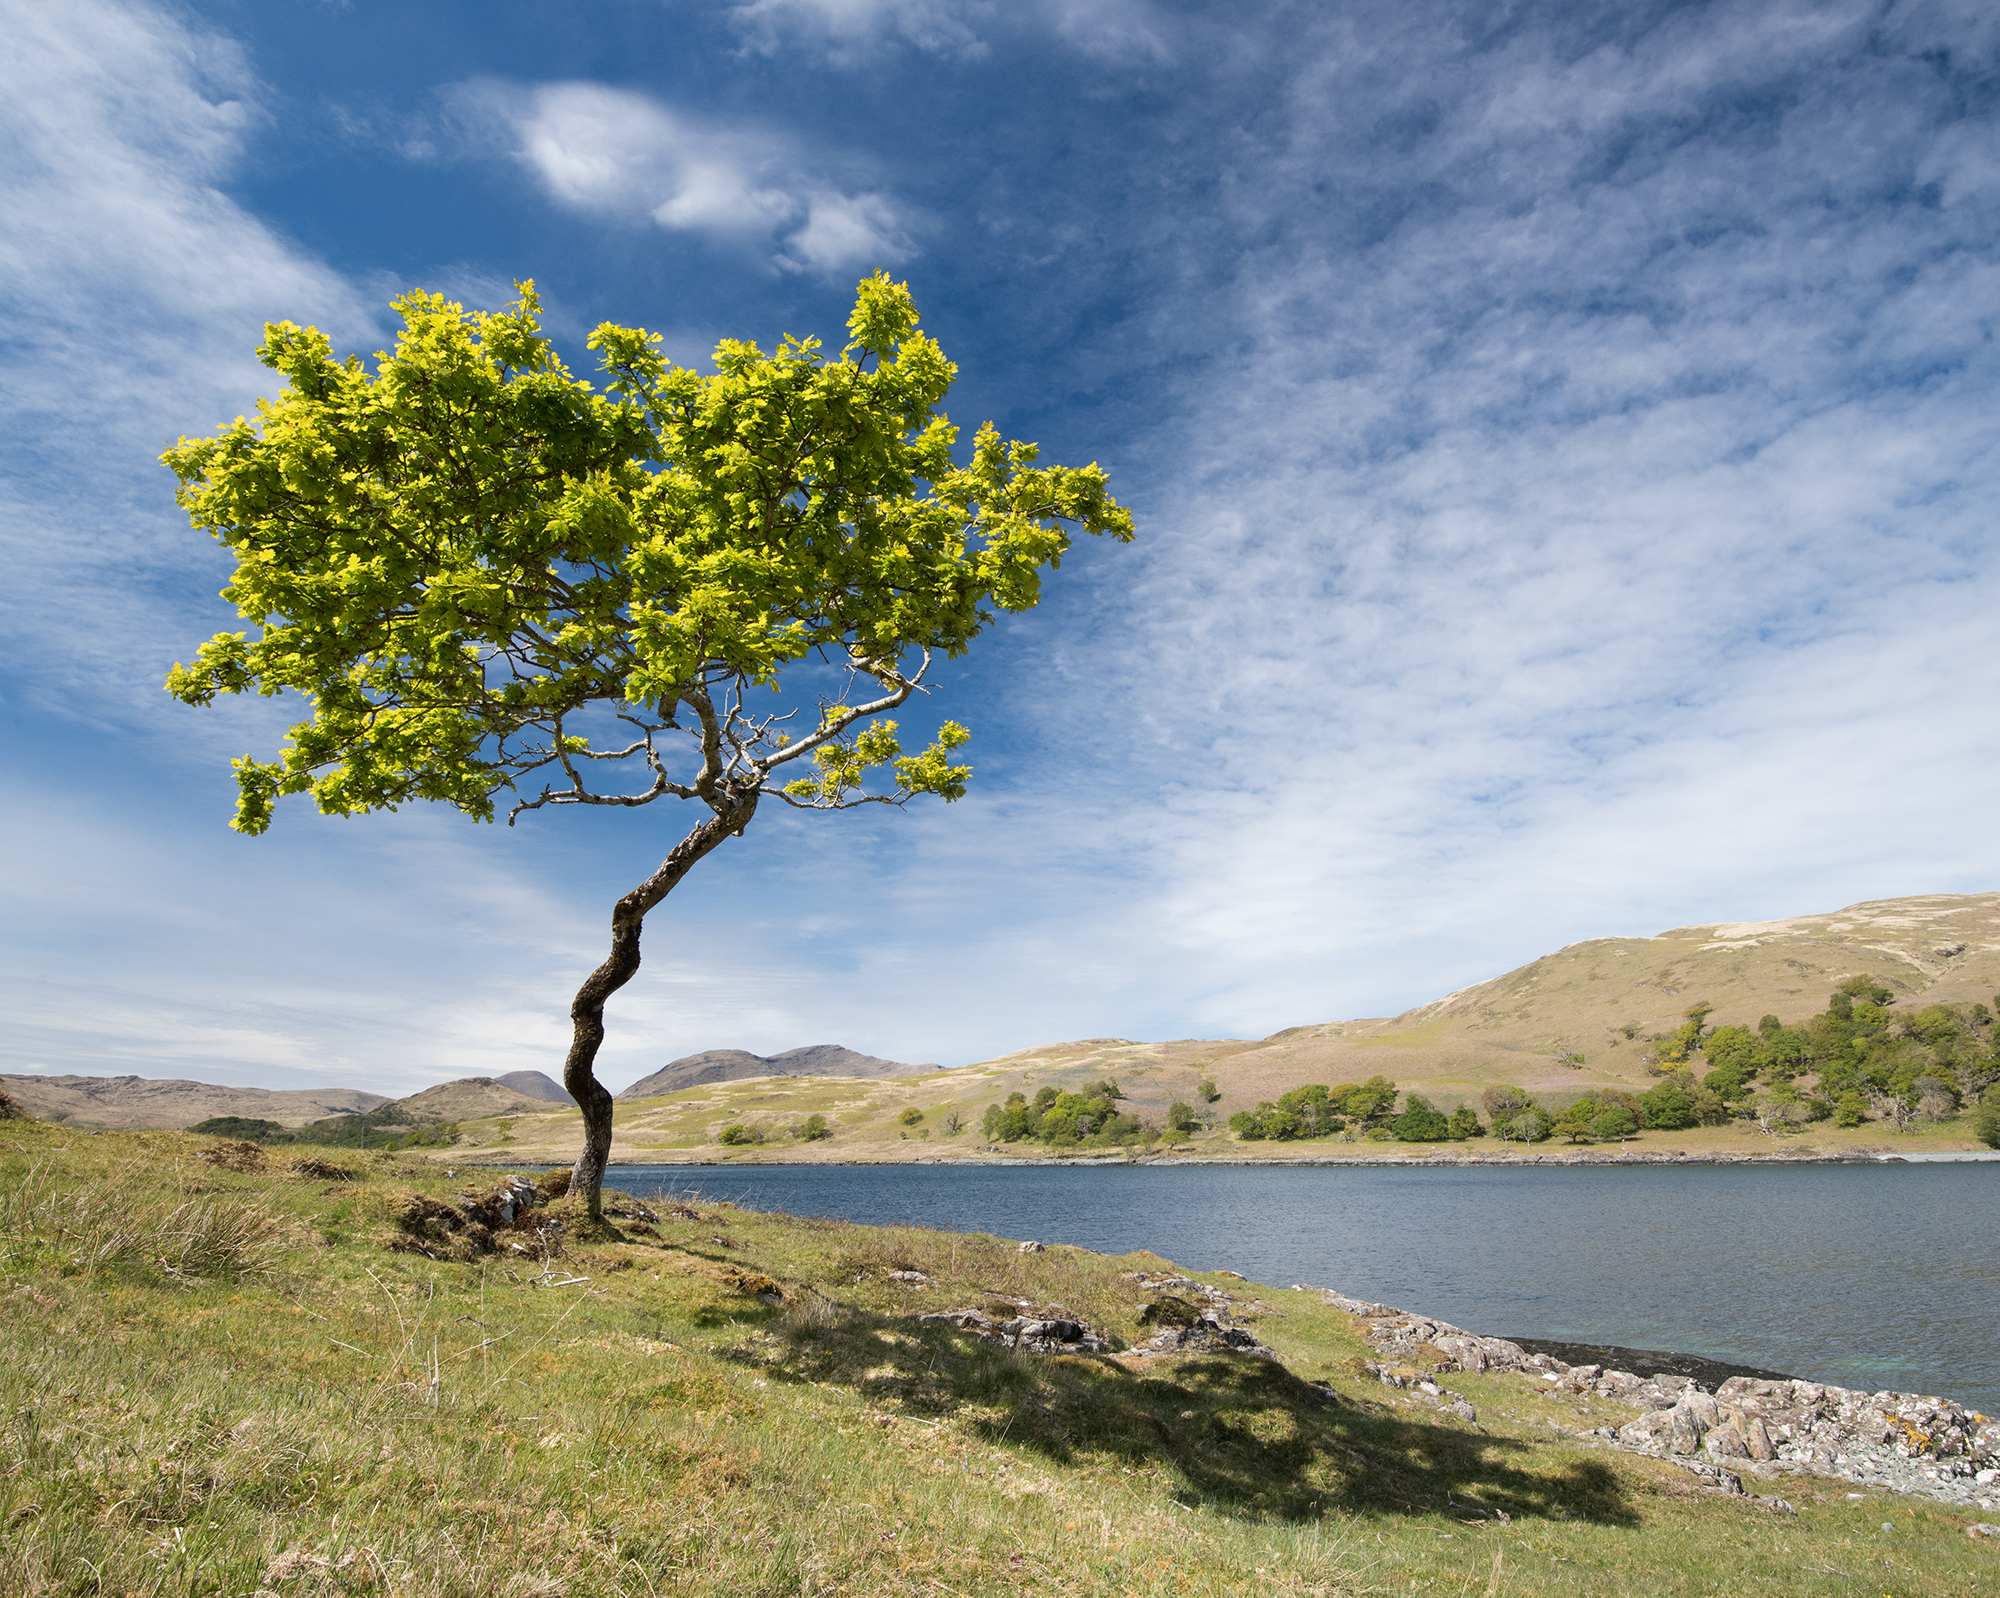 Solitary tree with green leaves on grassy bank next to body of water on sunny day